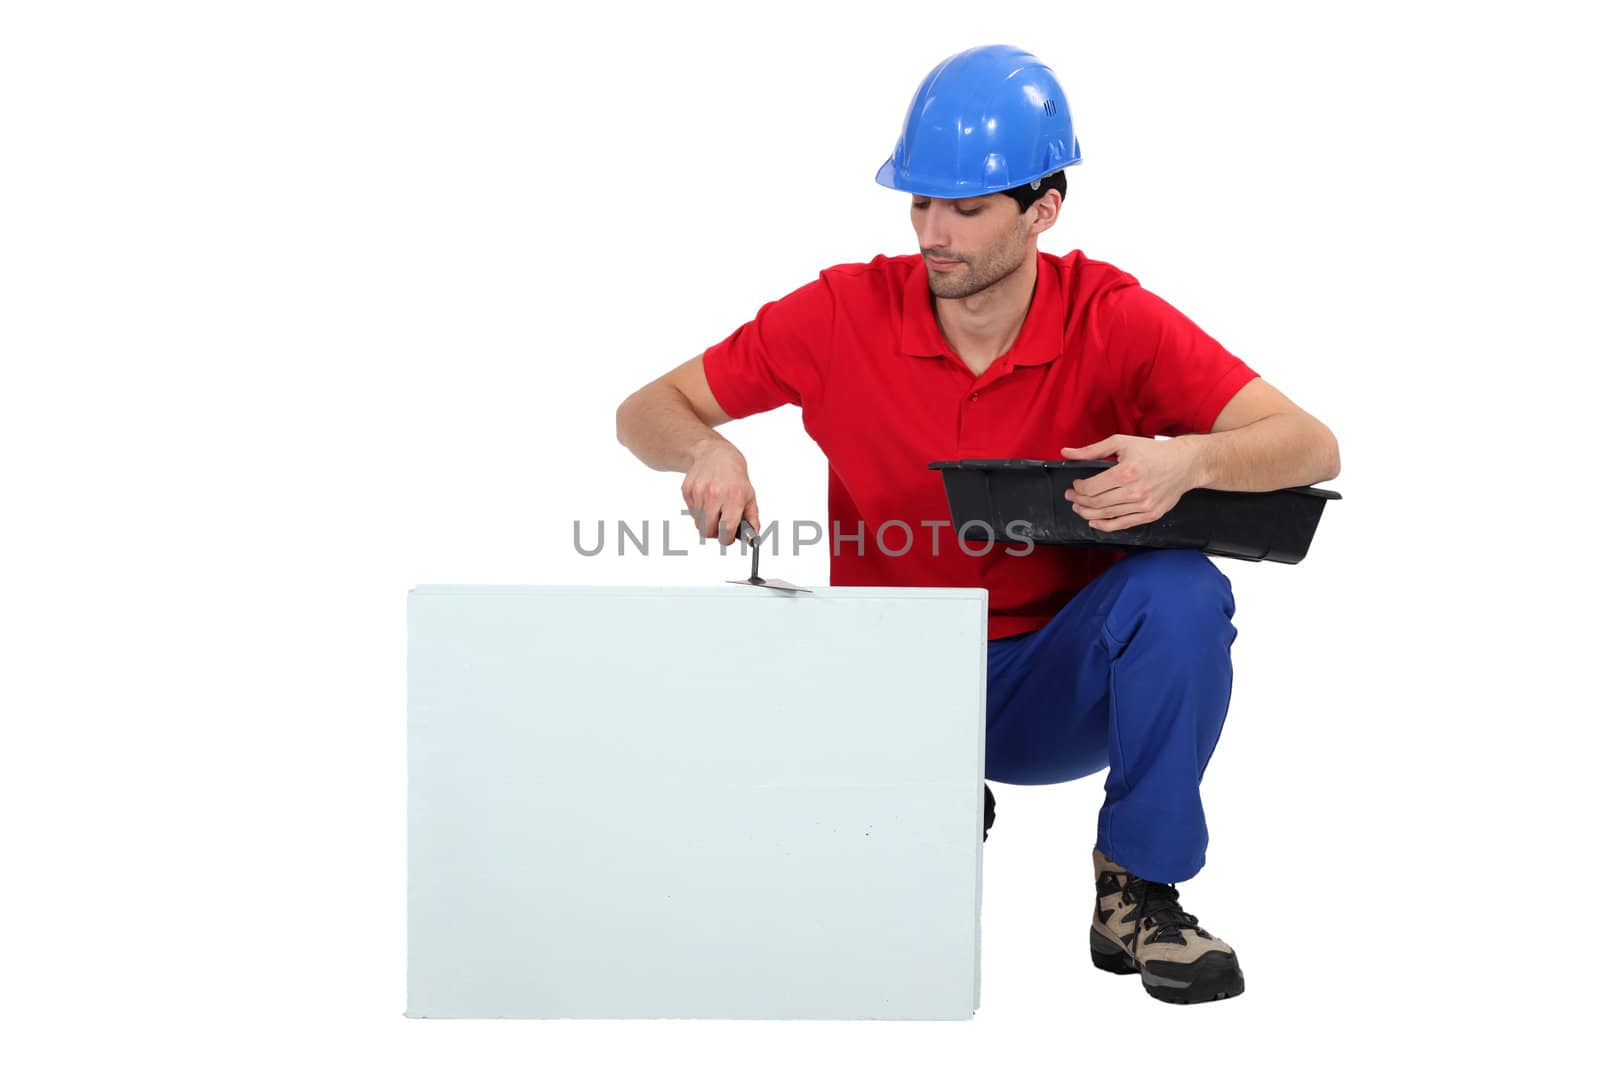 Bricklayer cementing a board left blank for your message